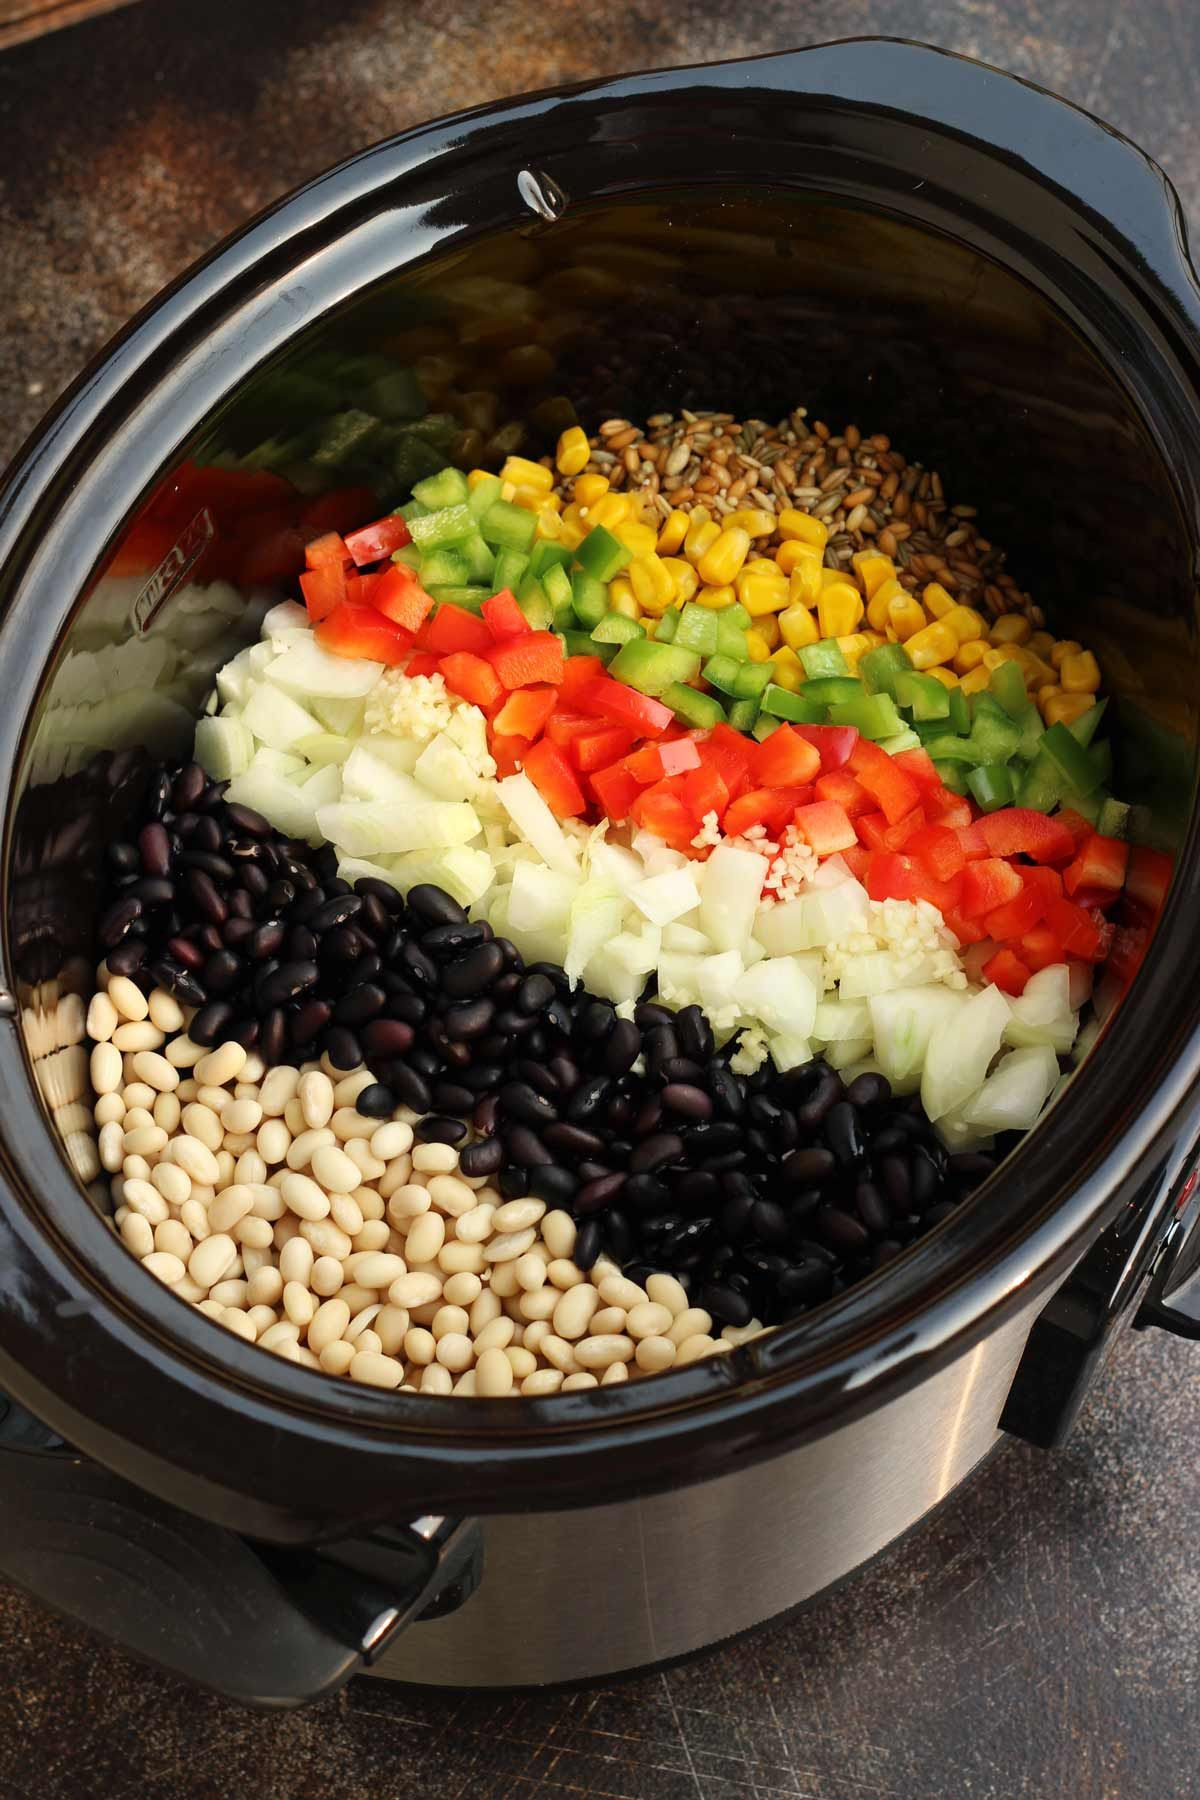 Easy Vegan Crockpot Recipes
 The Best Slow Cooker Vegan Chili Recipe is wholesome